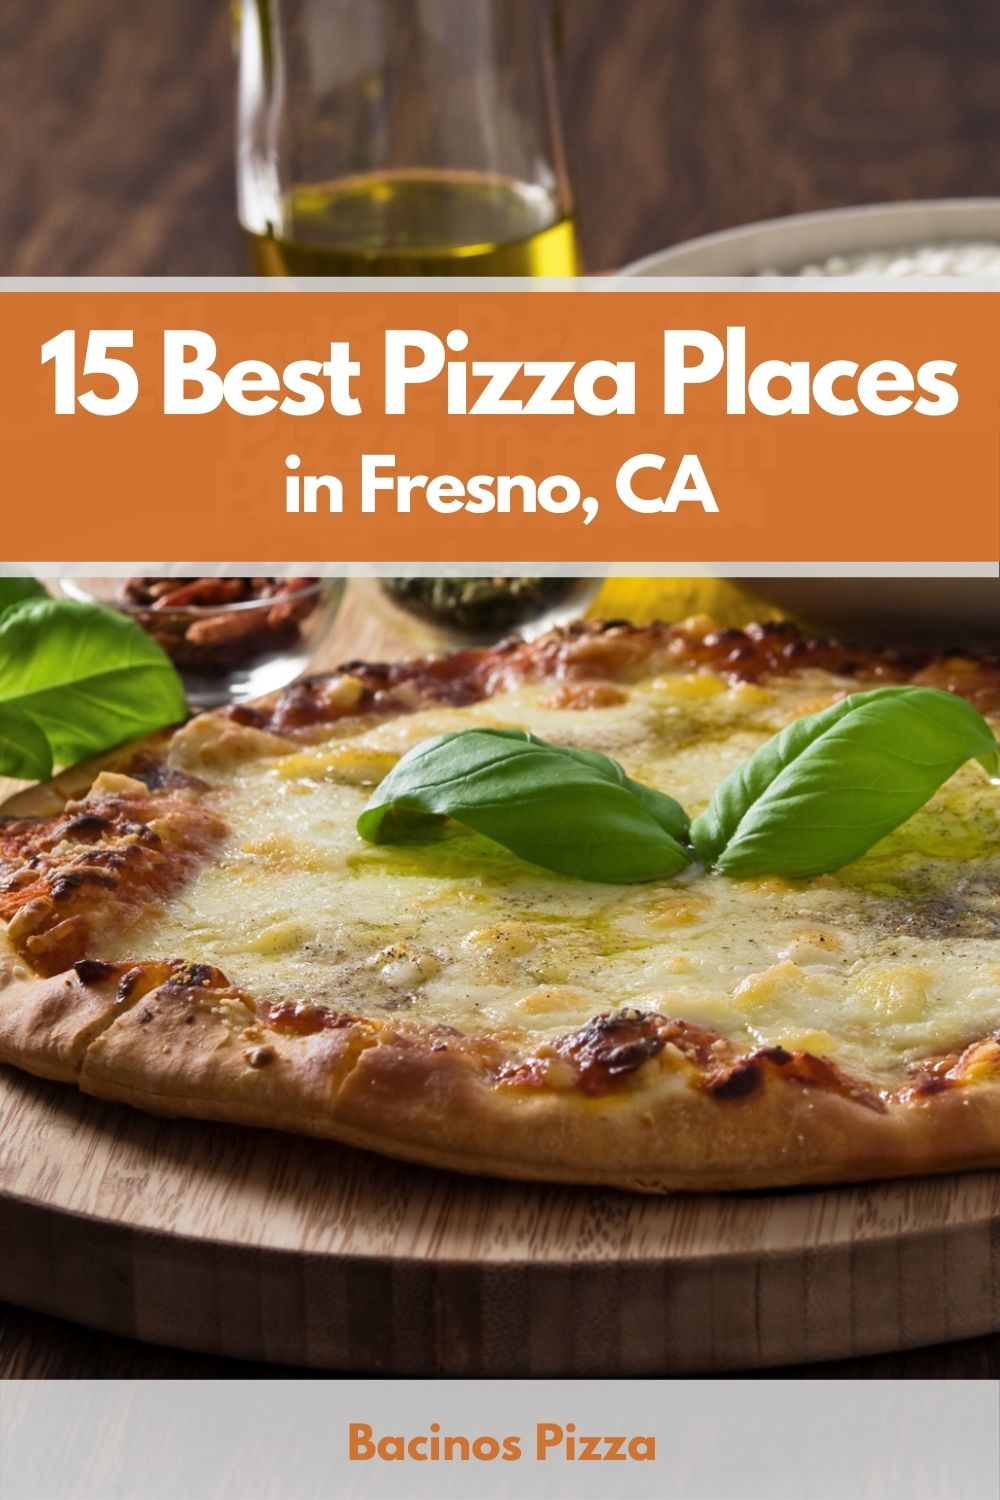 15 Best Pizza Places in Fresno, CA pin